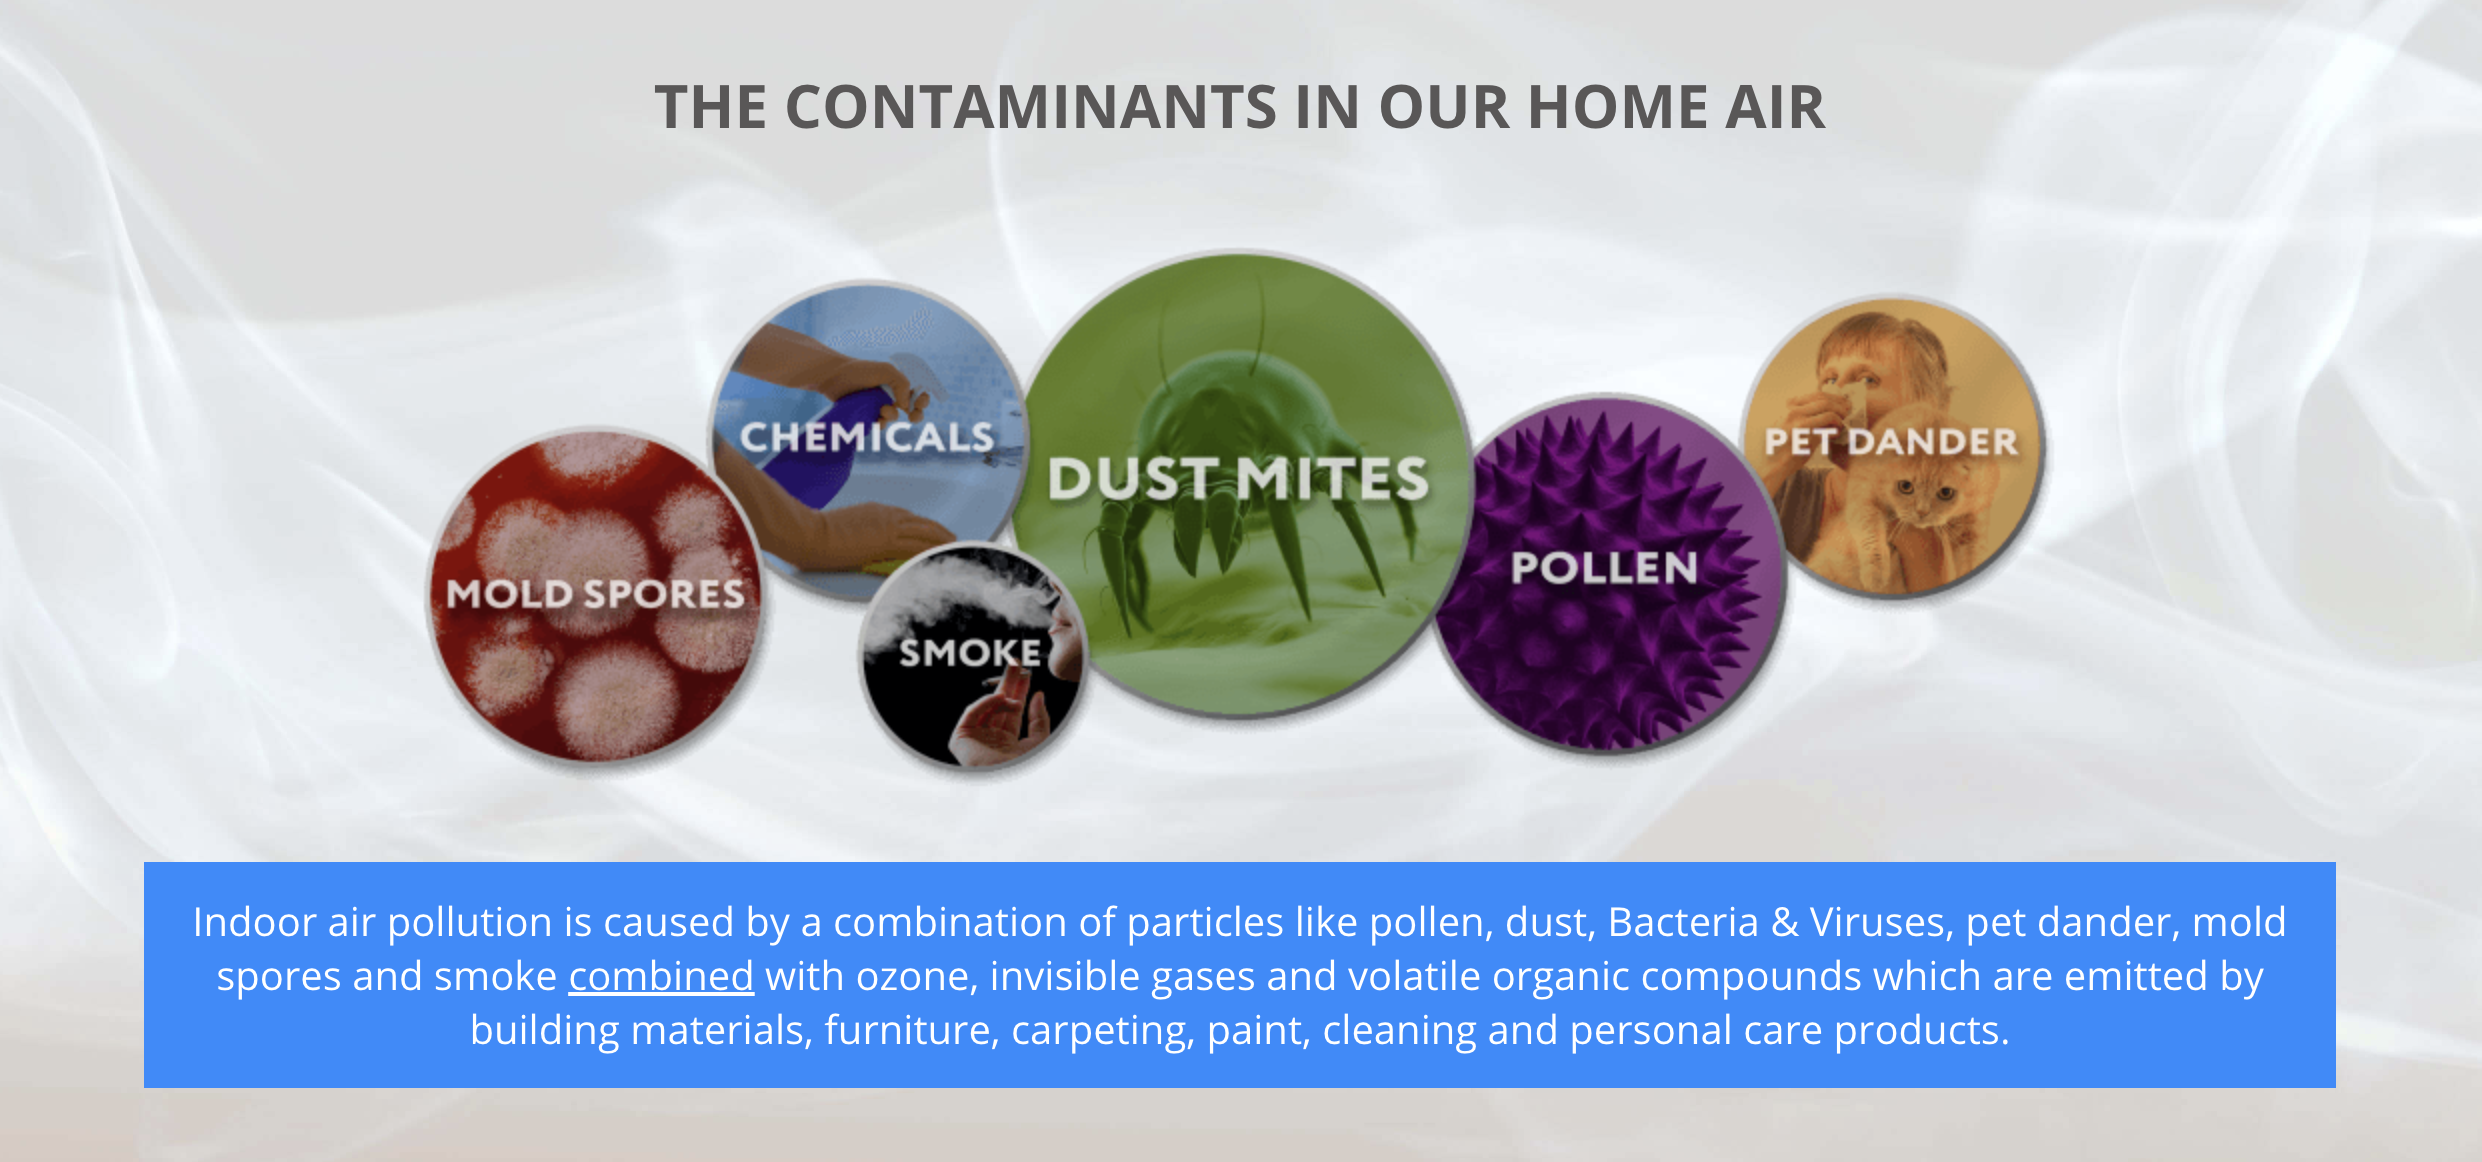 The contaminants in our home air diagram on AirDoctor's website